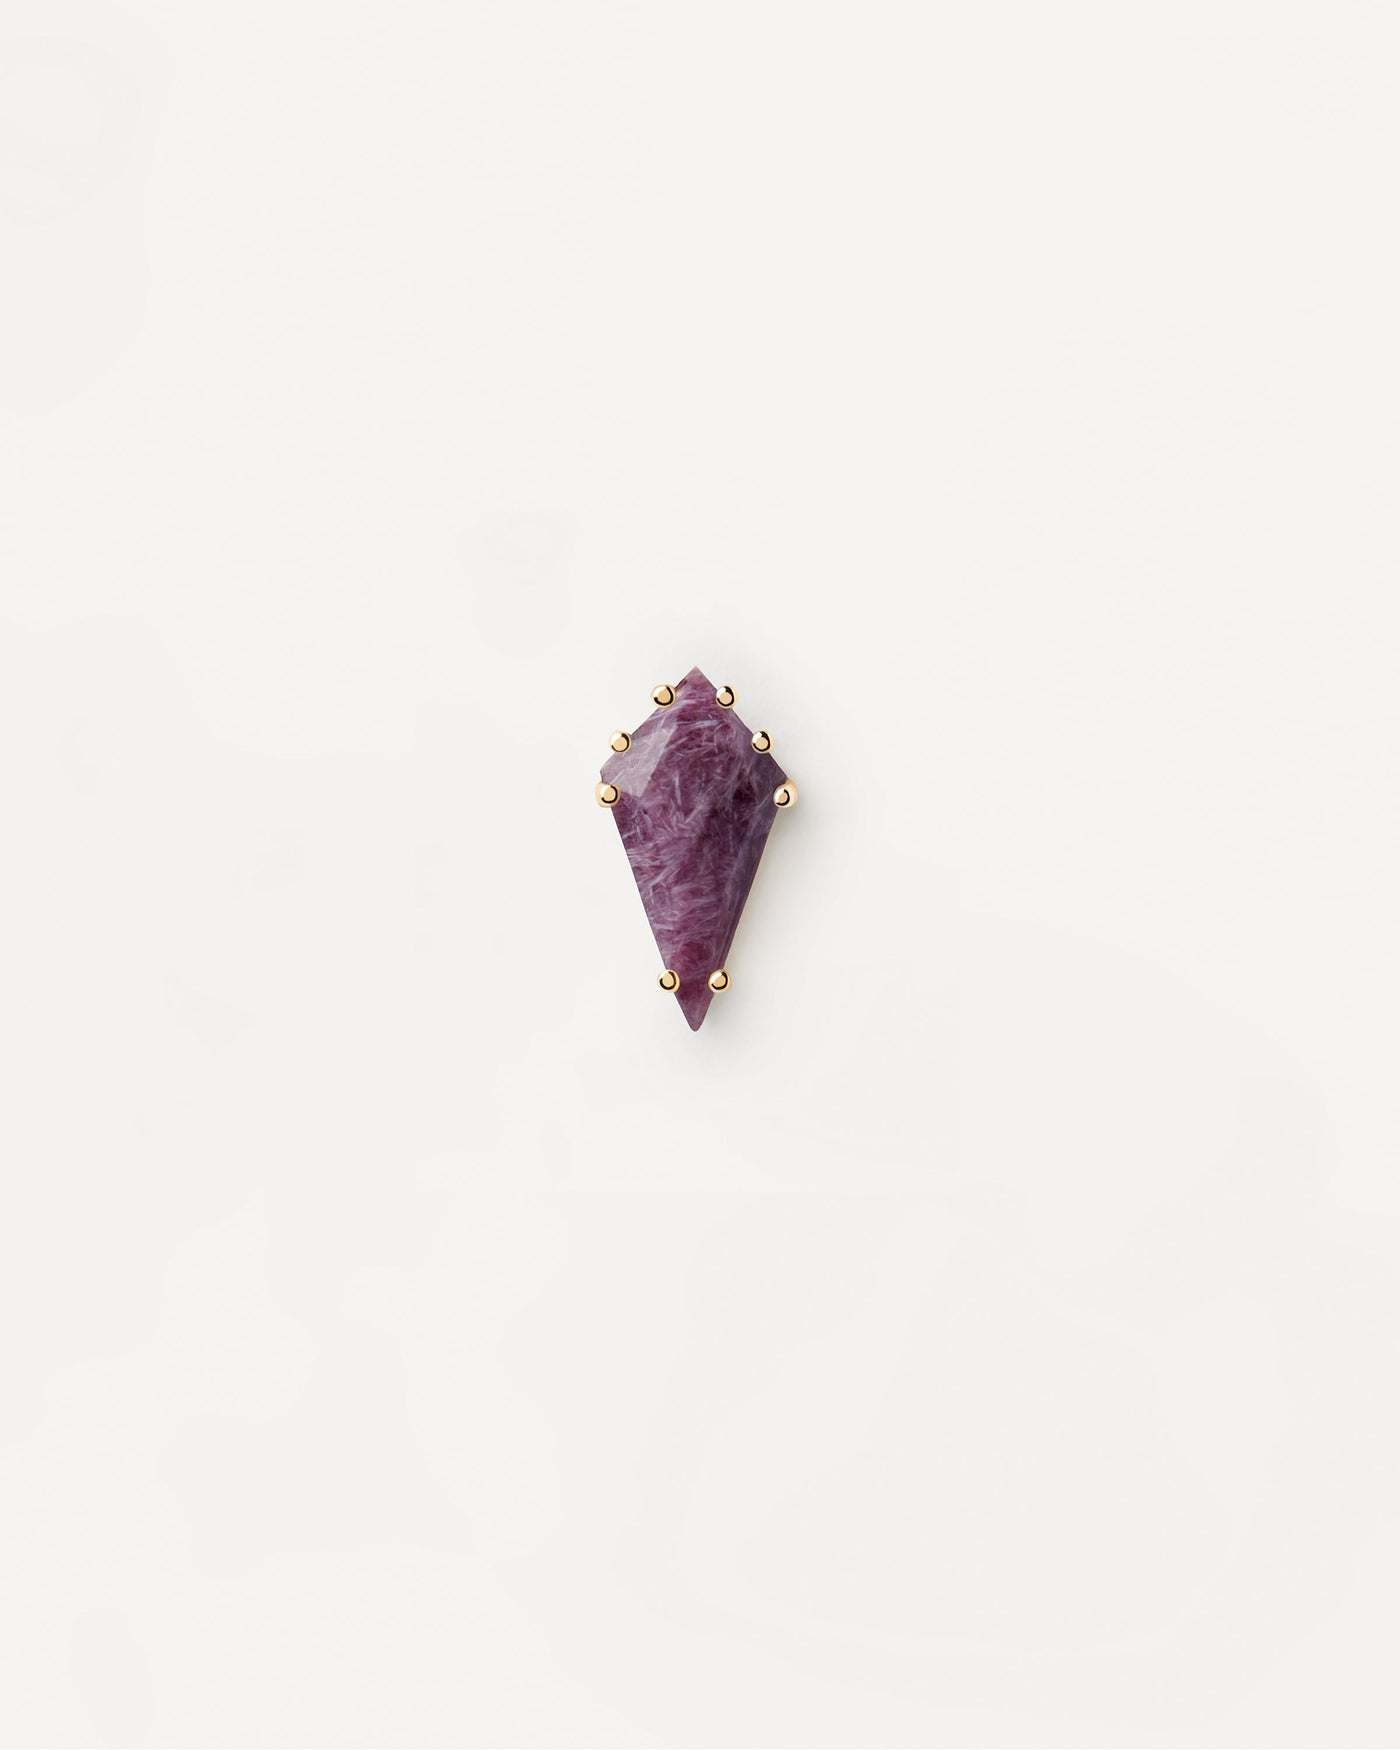 2023 Selection | Akiro Charoite Single Earring. Gold-plated pin ear piercing with purple gemstone in pointy shape. Get the latest arrival from PDPAOLA. Place your order safely and get this Best Seller. Free Shipping.